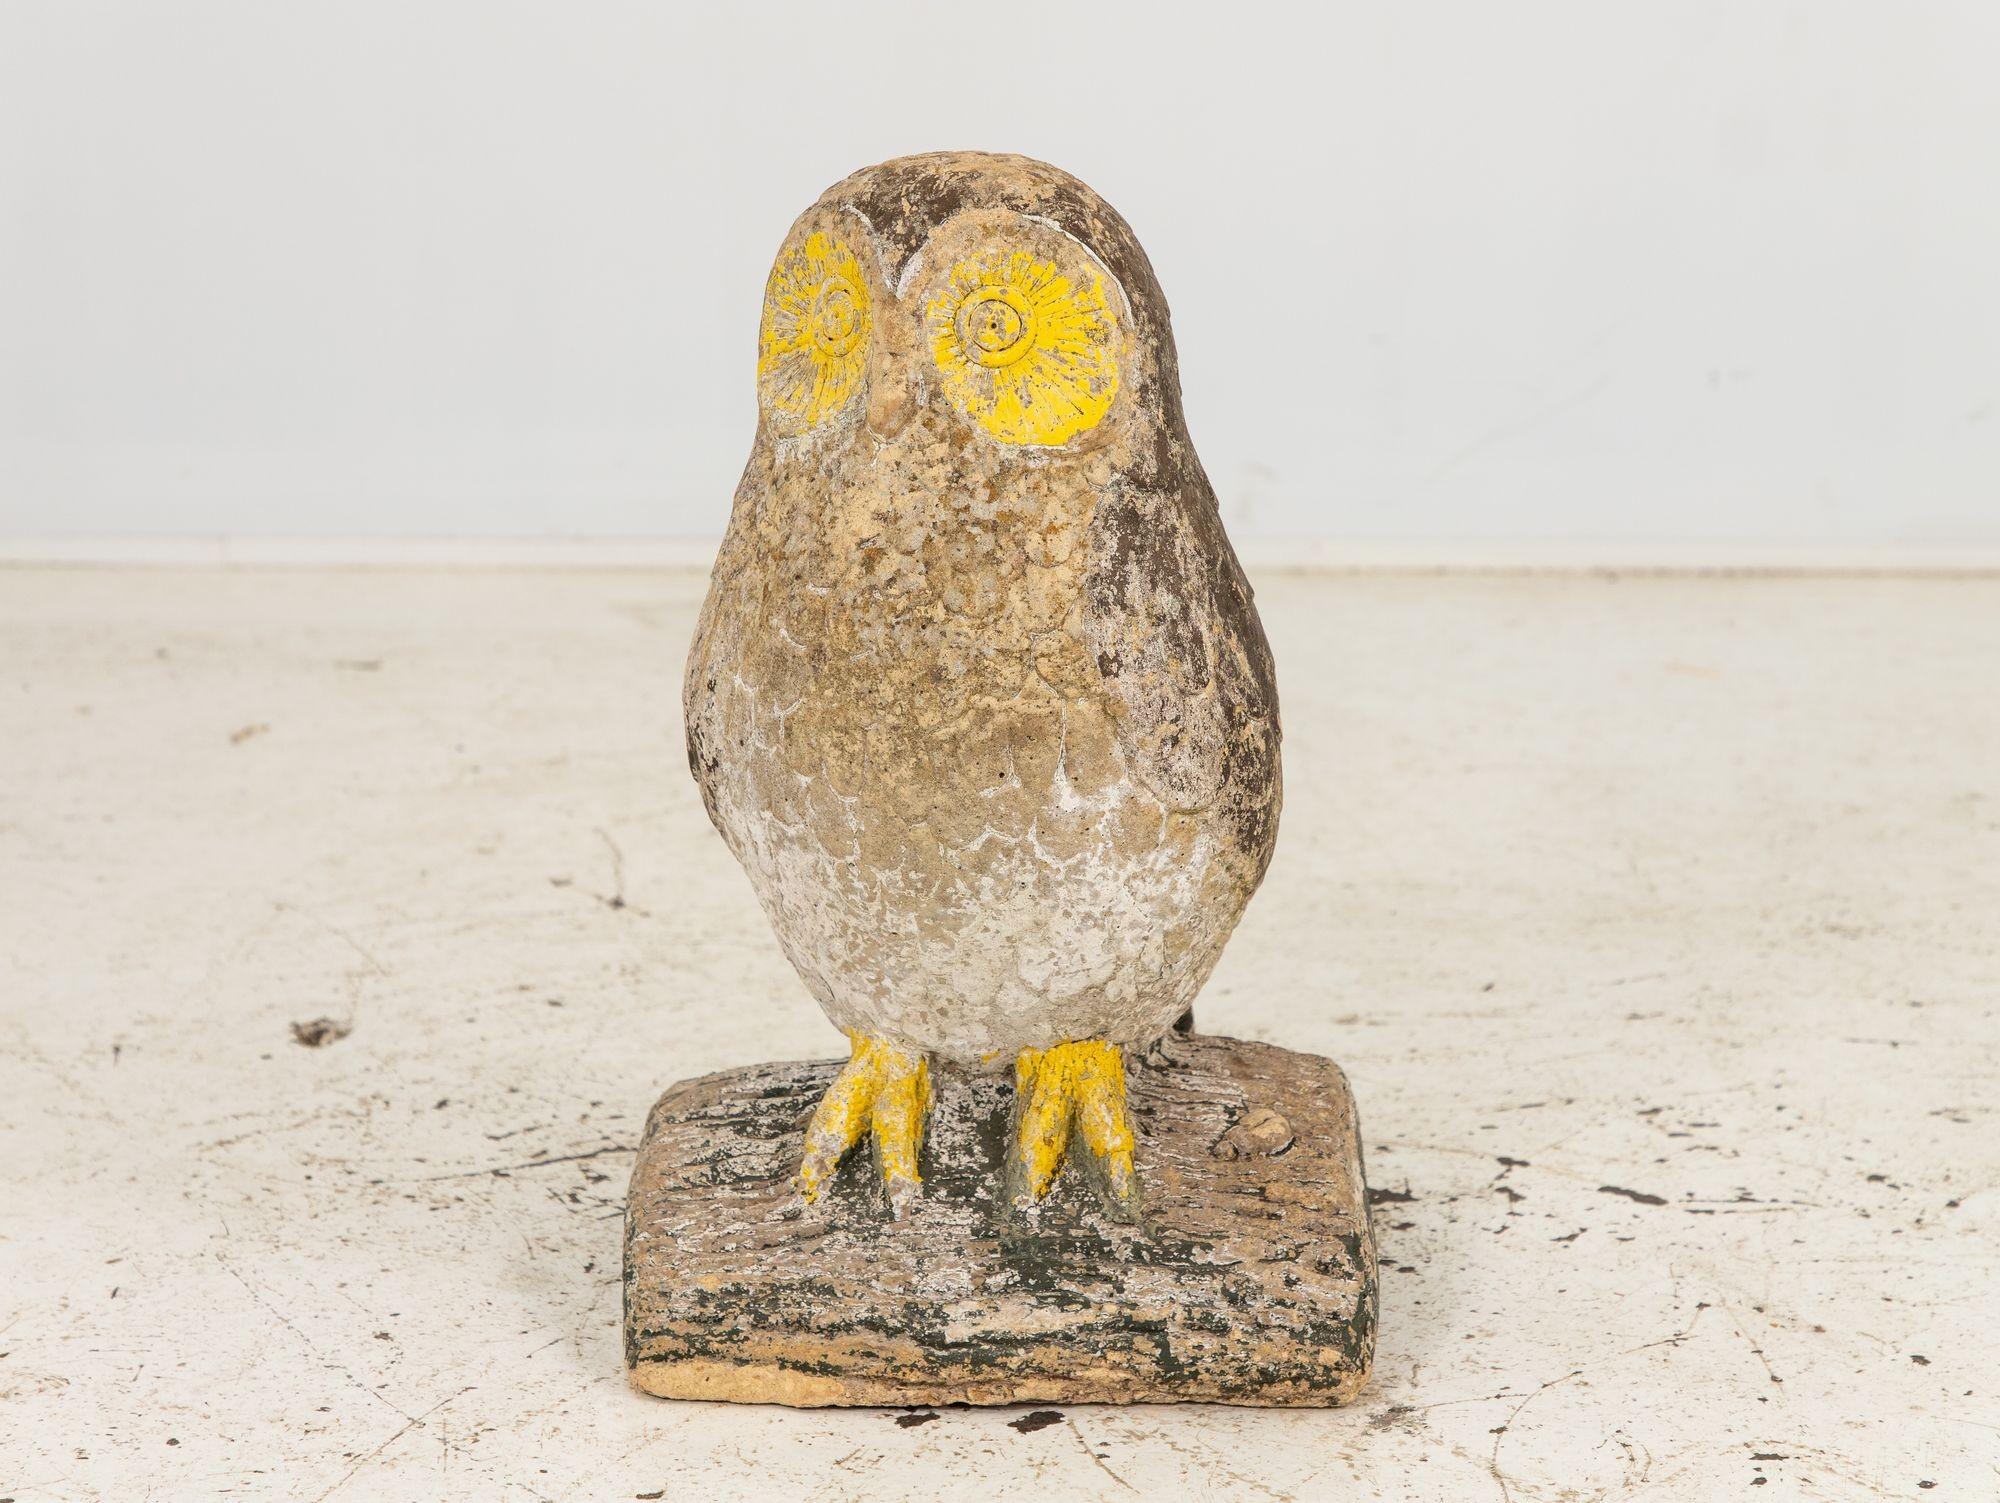 This early 20th-century French cast stone owl, gracefully perched upon a split log, stands as a captivating garden ornament. Its exquisite craftsmanship showcases intricate detailing around the eyes and feathers, which adds a touch of enchantment to